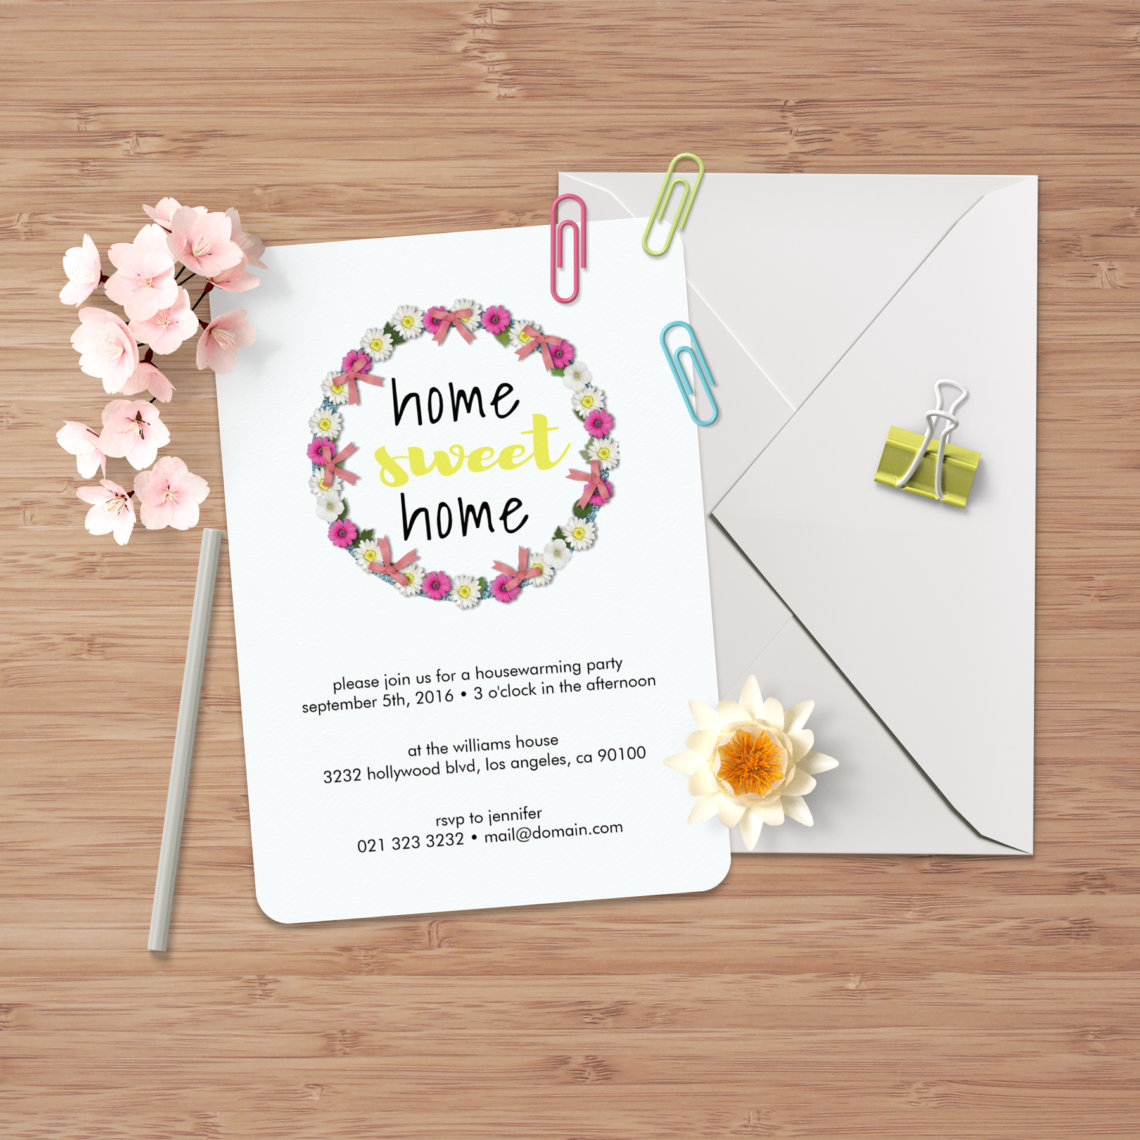 Floral Wreath Home Sweet Home Housewarming Party Invitation by J32 Design